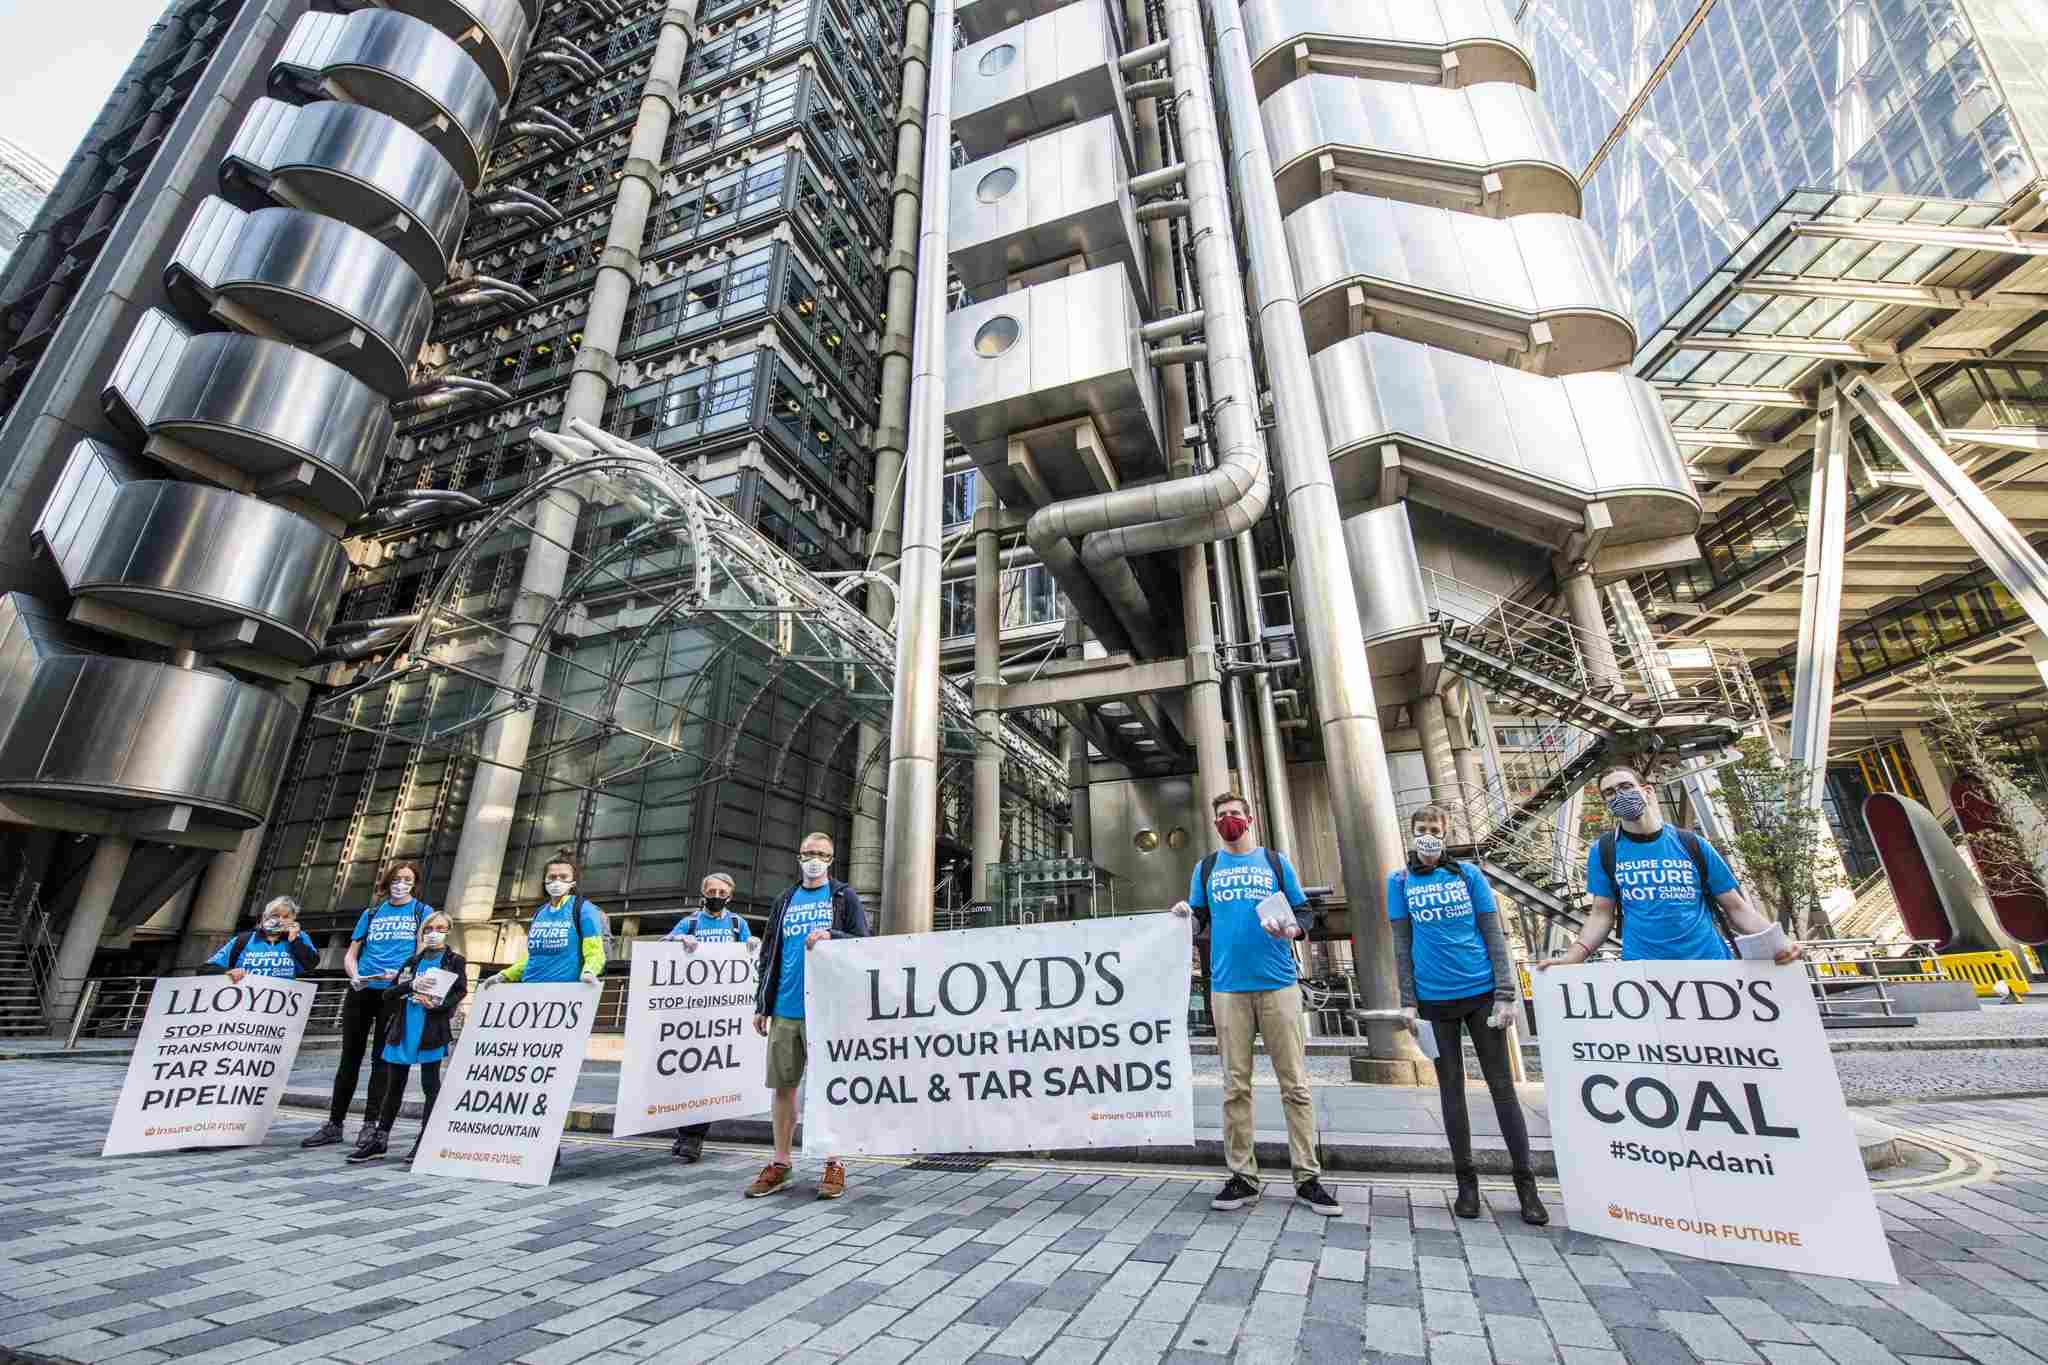 Activists stand with signs outside of Lloyd's calling for an end to fossil fuel insuring